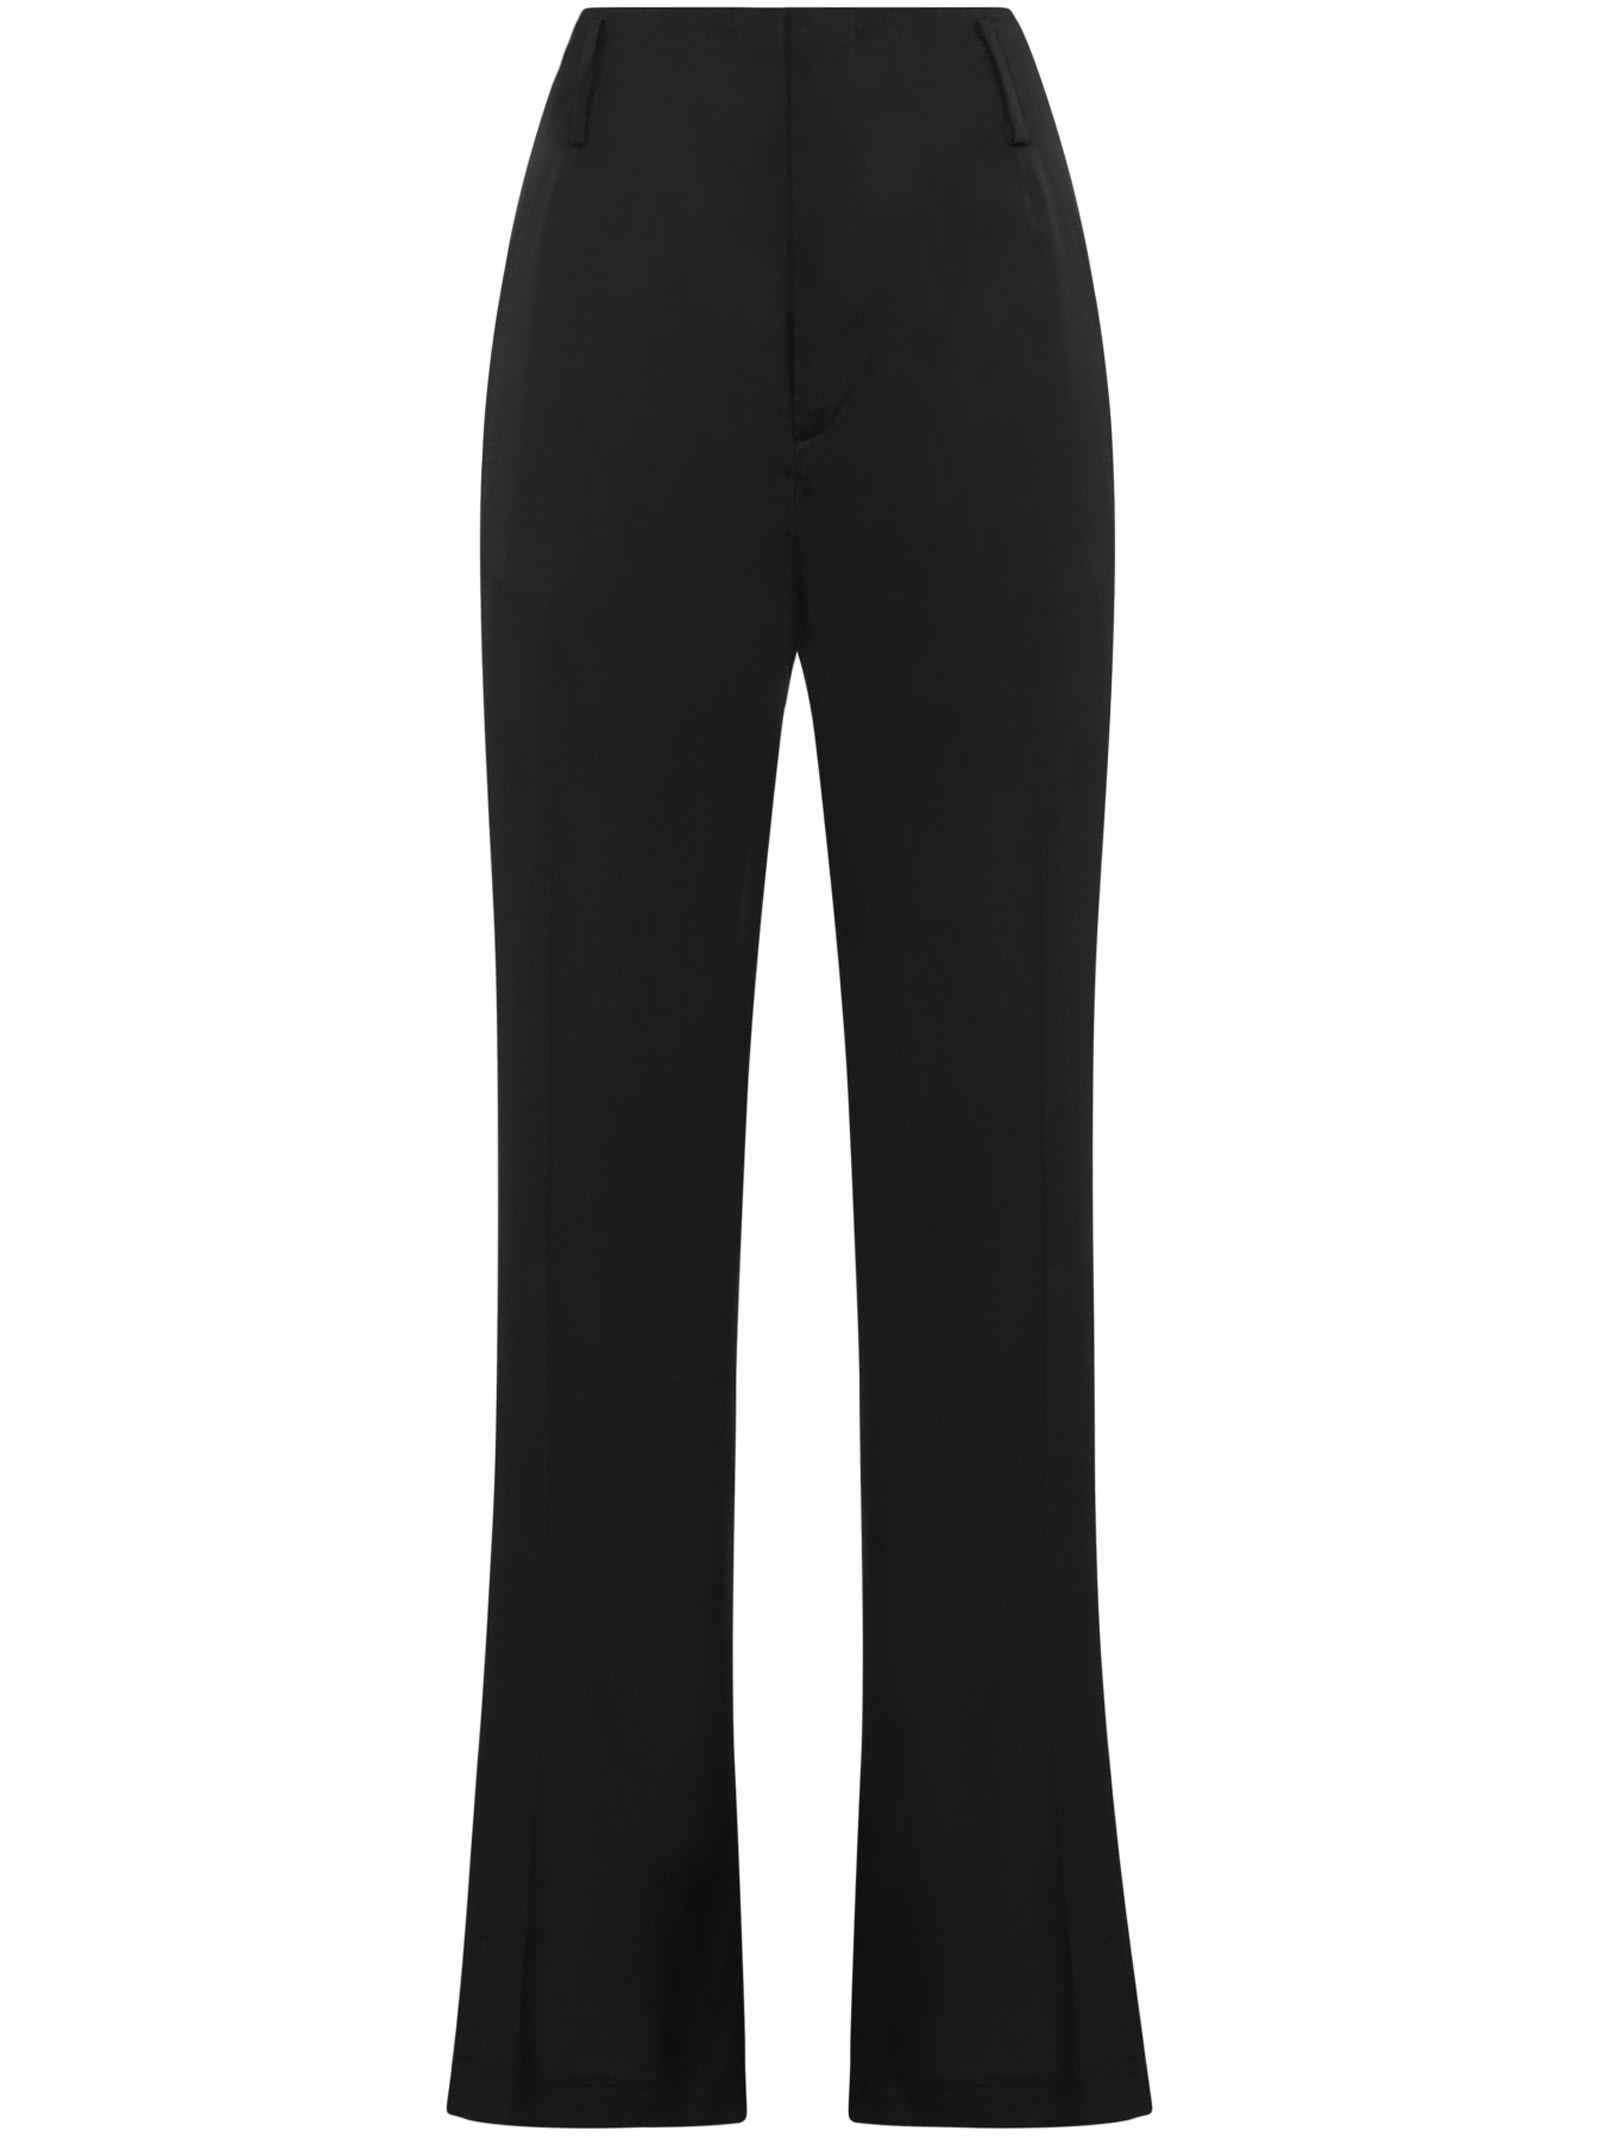 Mauro Grifoni Grifoni Trousers